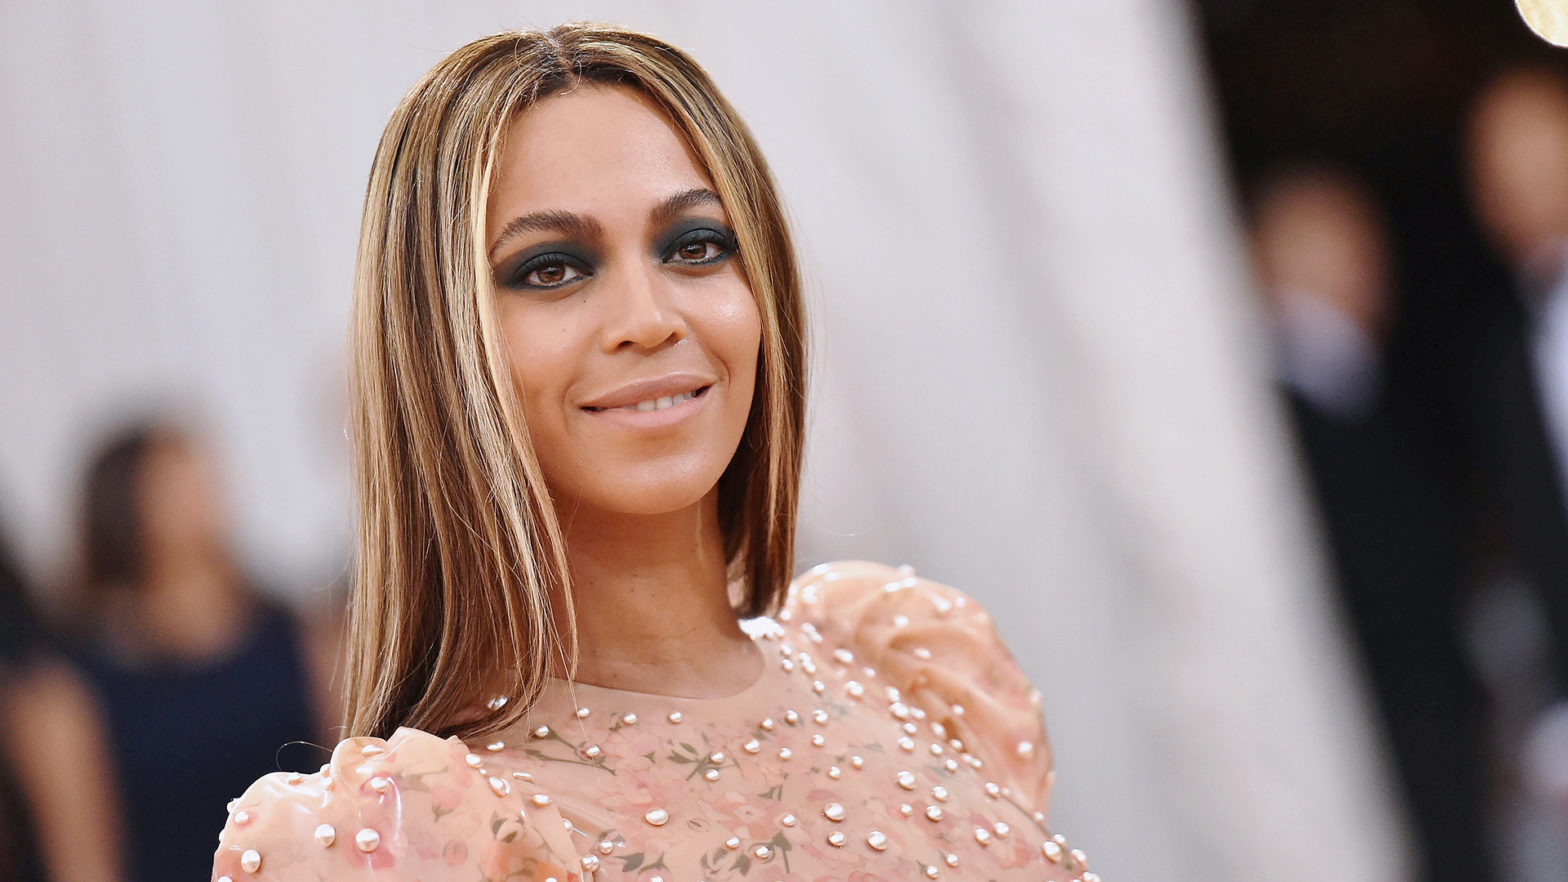 Inside Beyoncé's Investments and Her $500M Net Worth